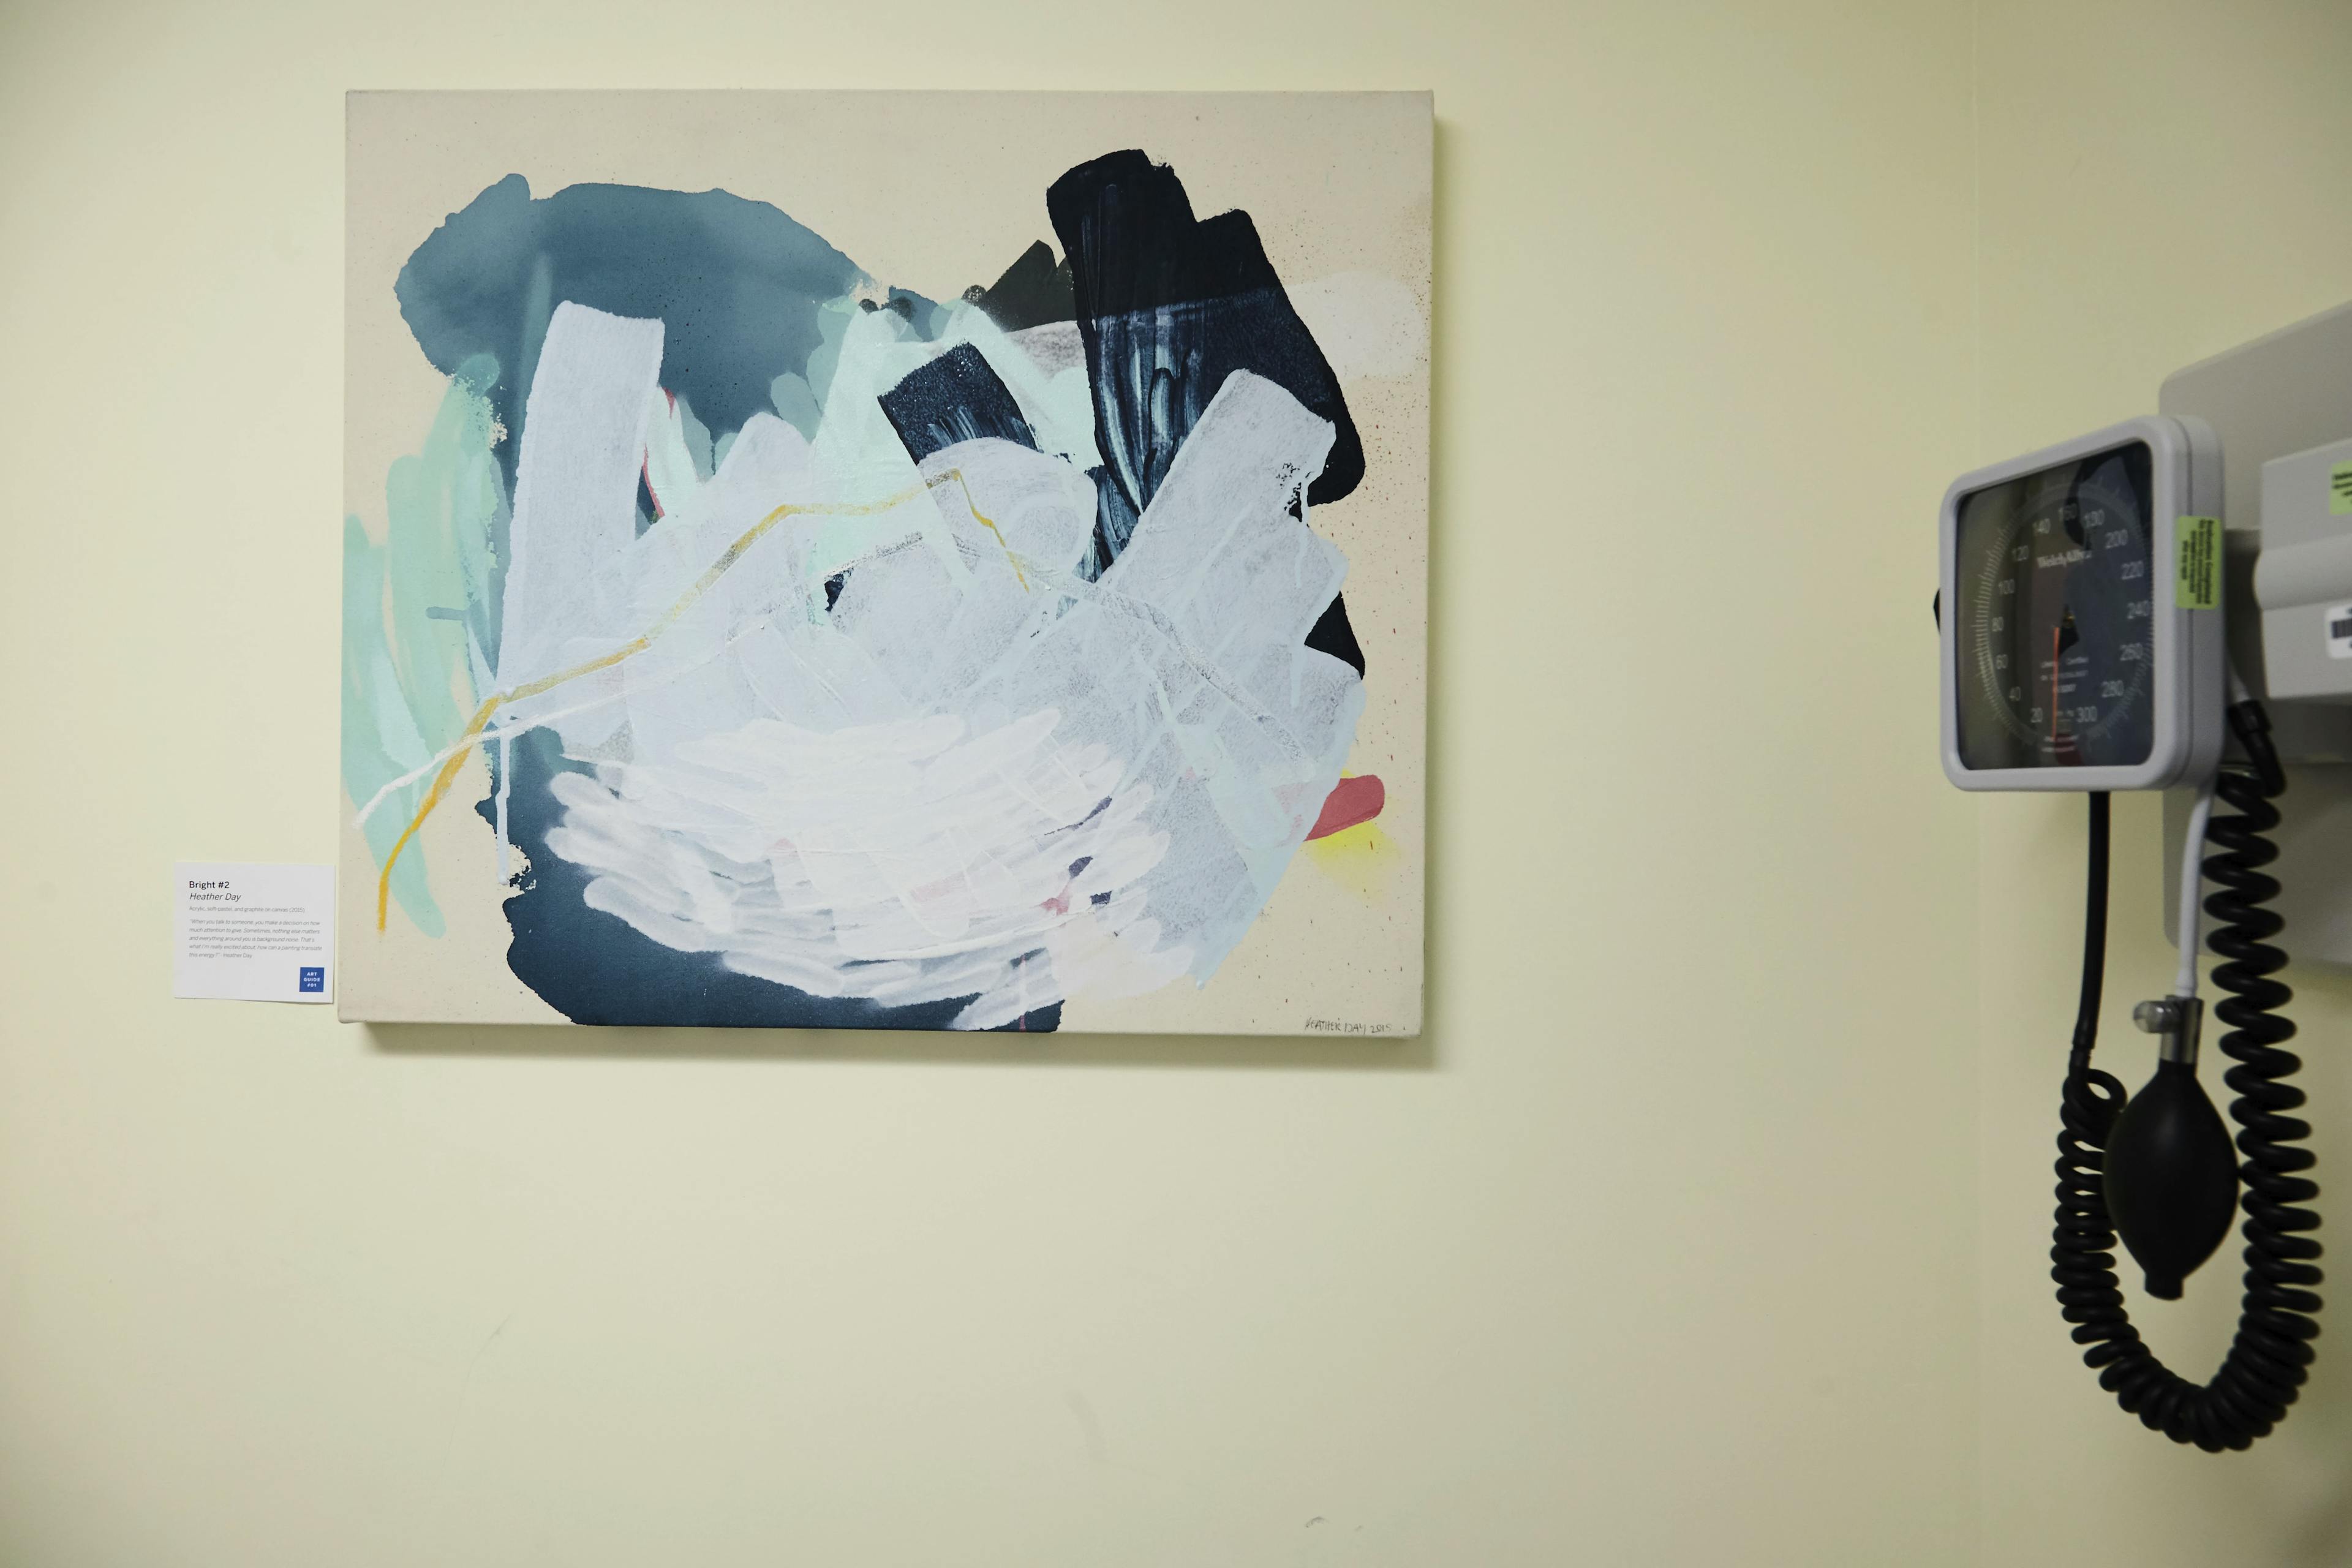 Gestural abstract painting by artist Heather Day installed on a wall next to a blood pressure machine at a hospital.